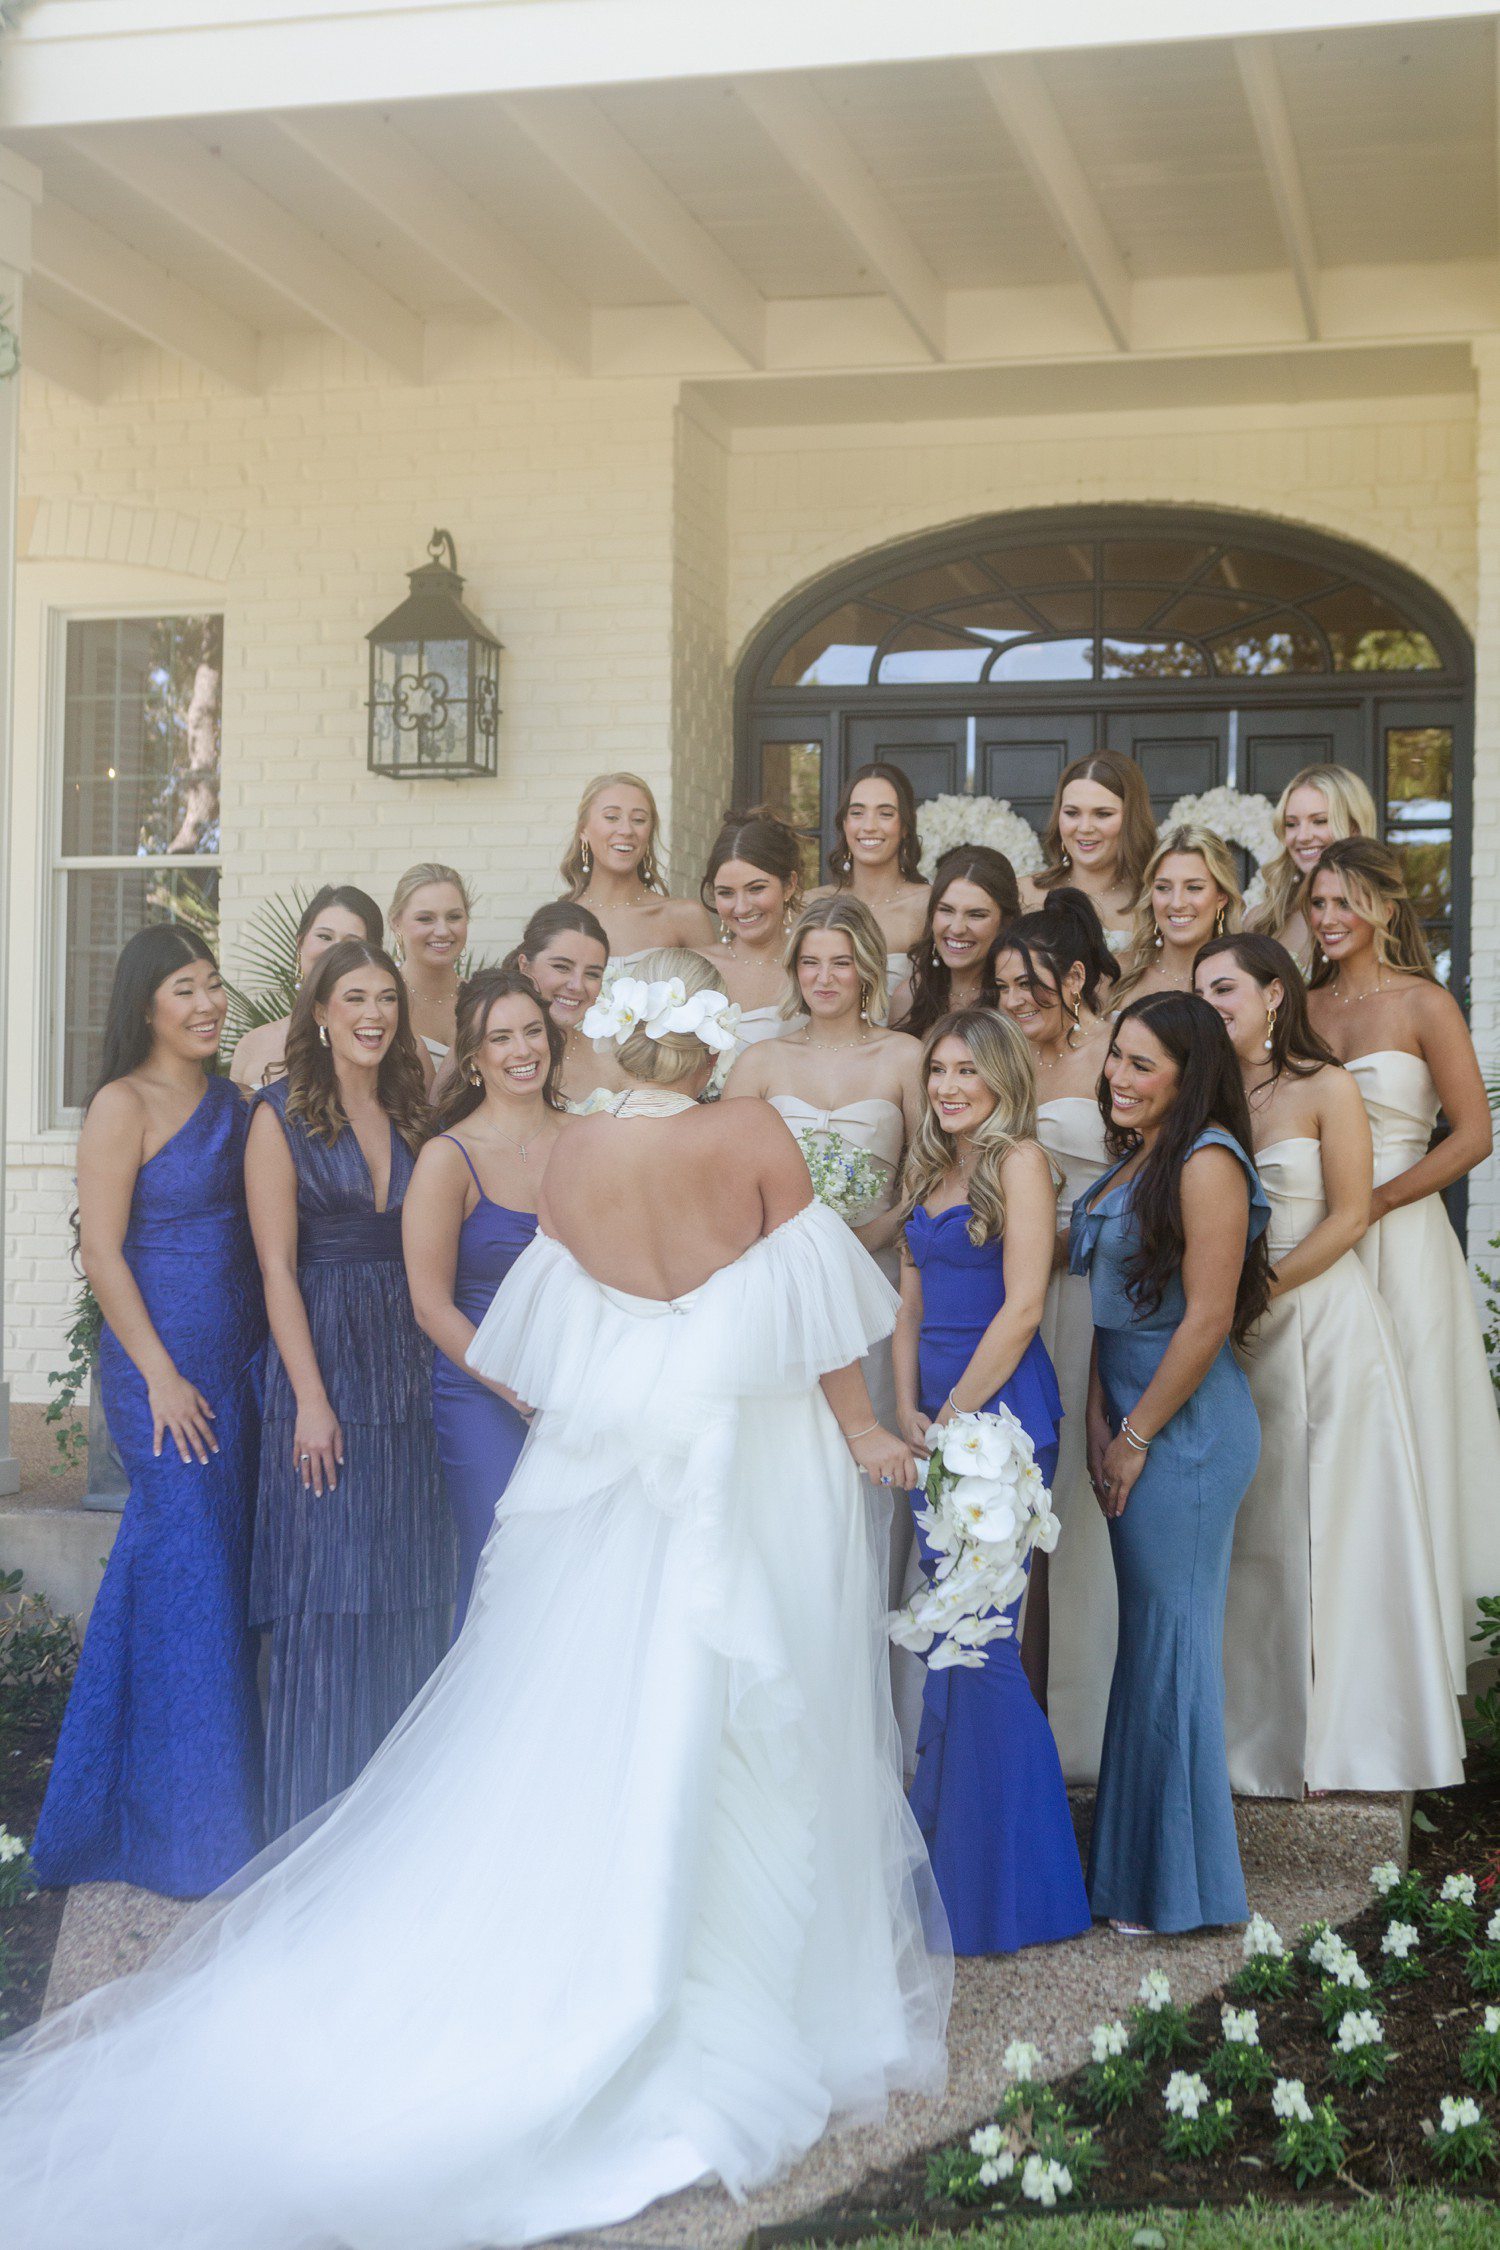 Bride surrounded by bridesmaids smiling at her.